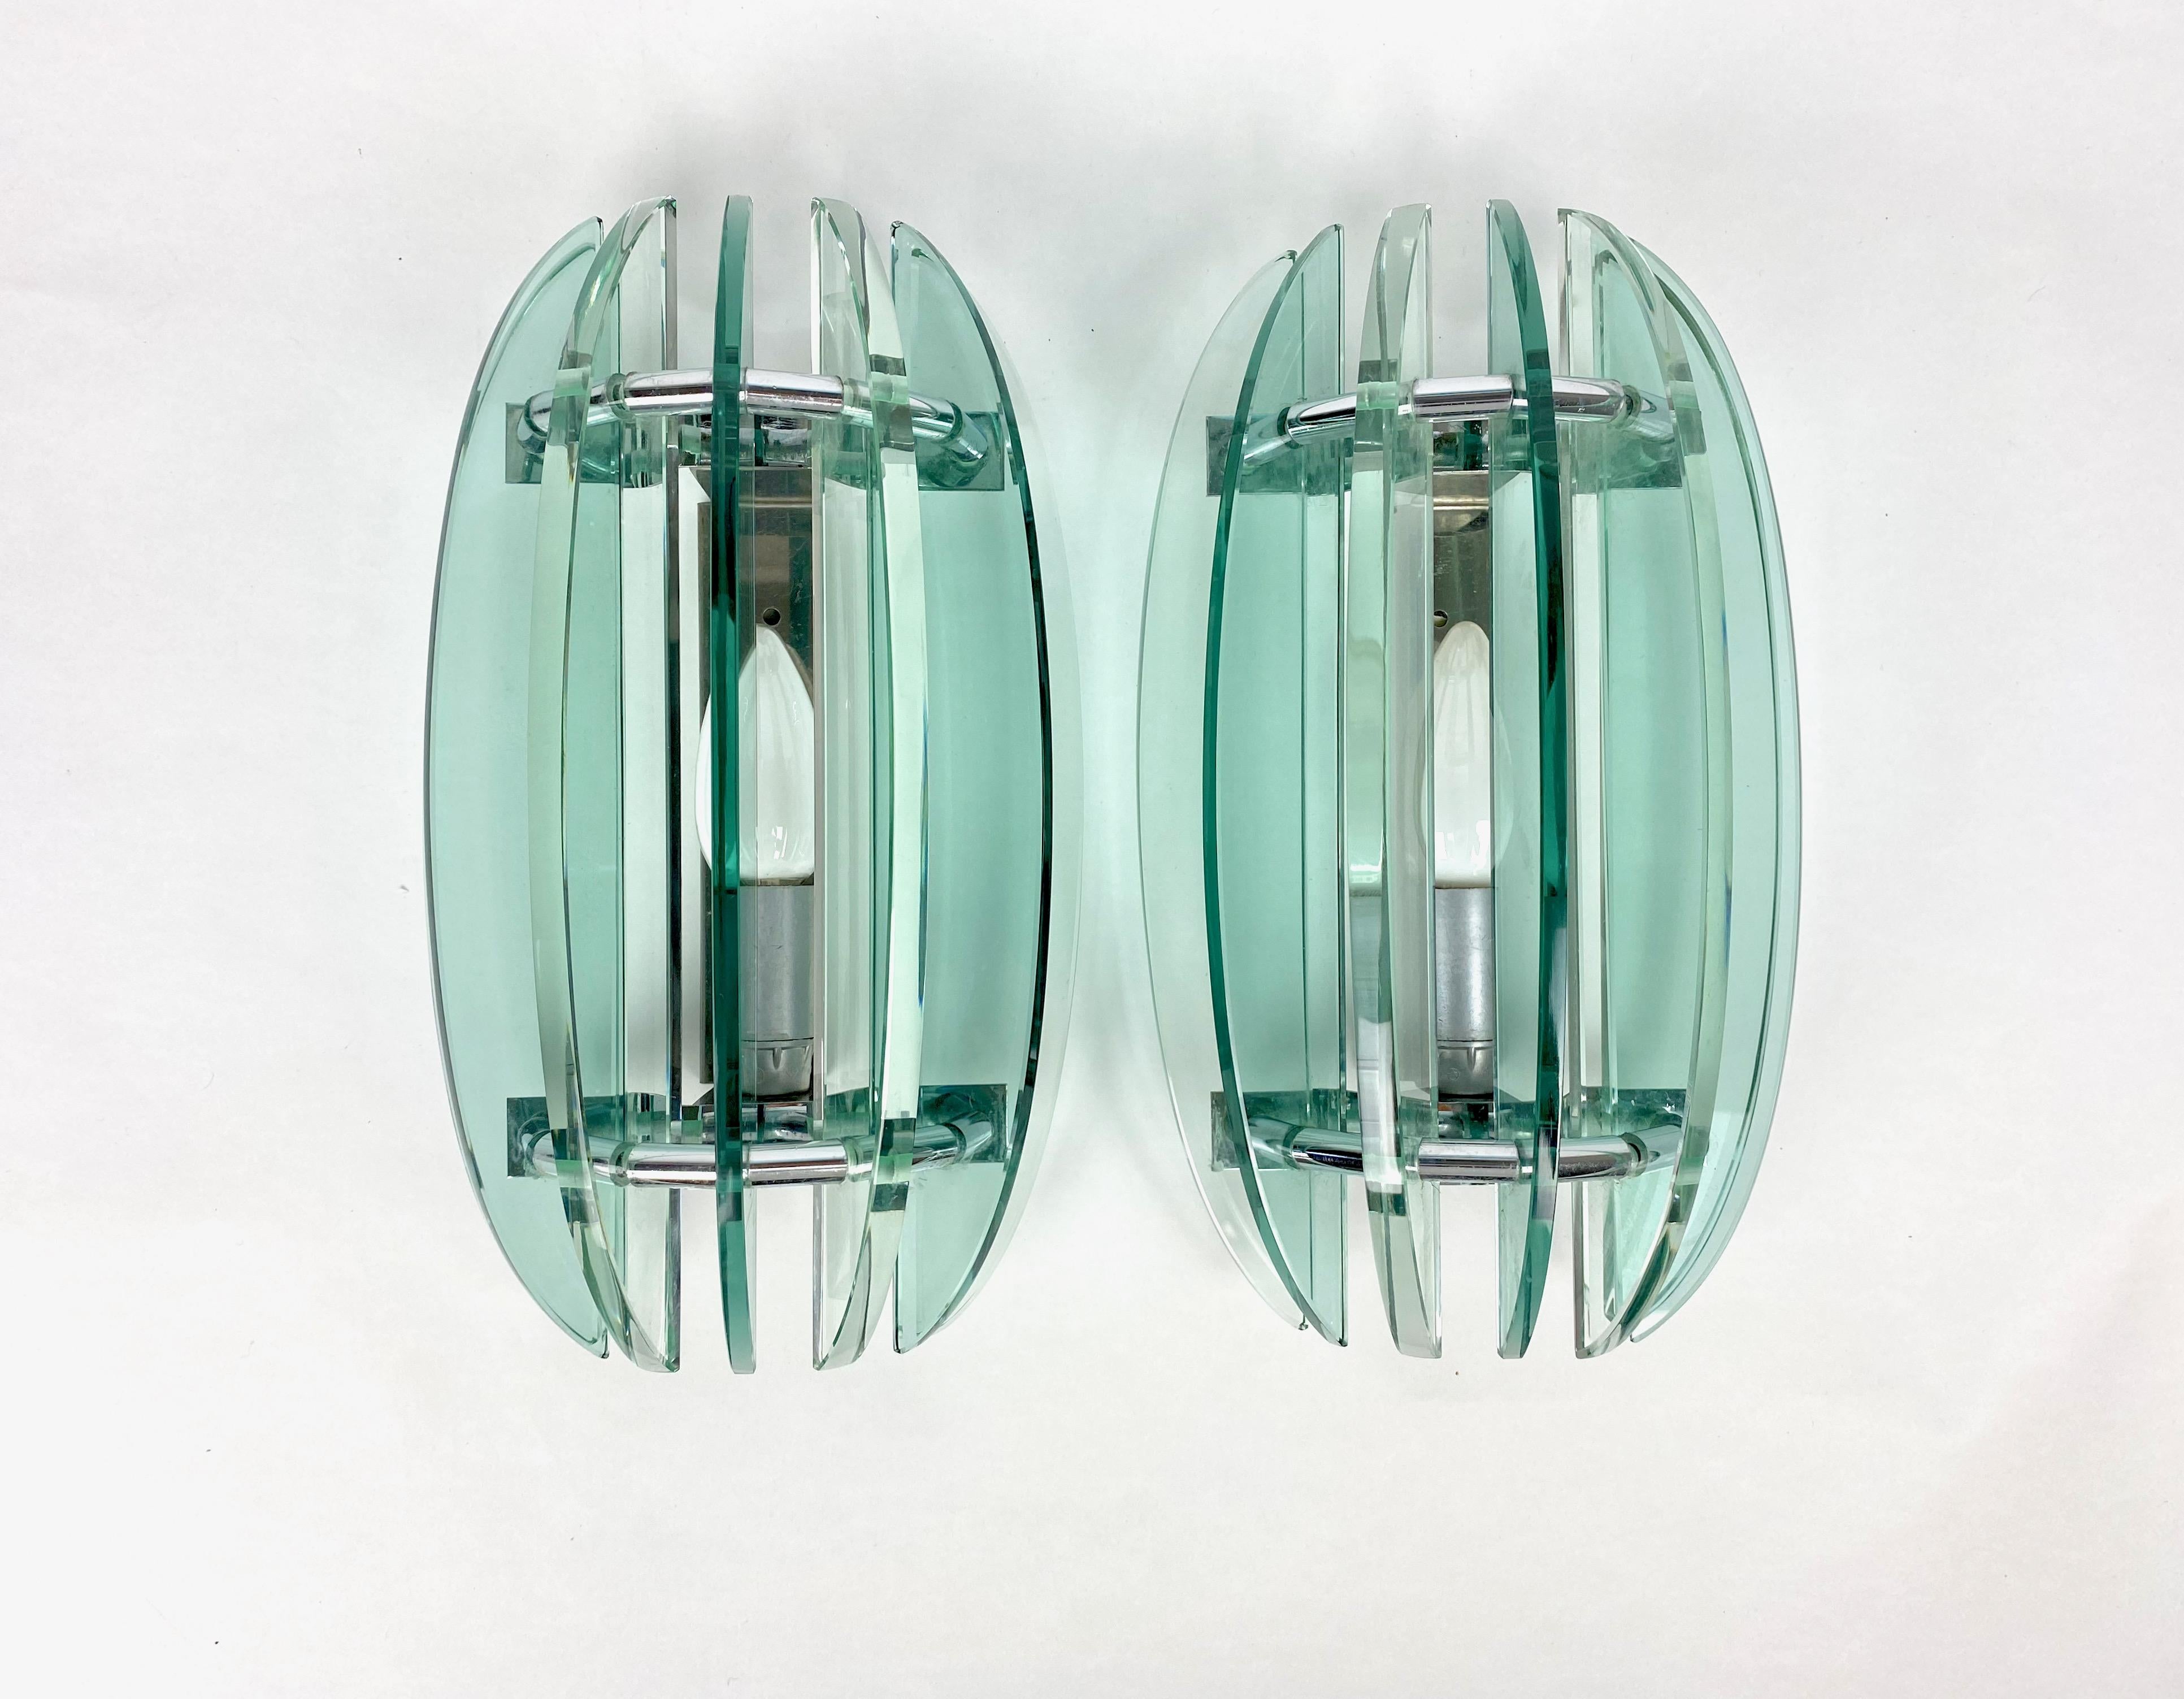 Pair of wall sconces in green glass and chrome by Veca, Italy, 1970s. The original label is still attached.